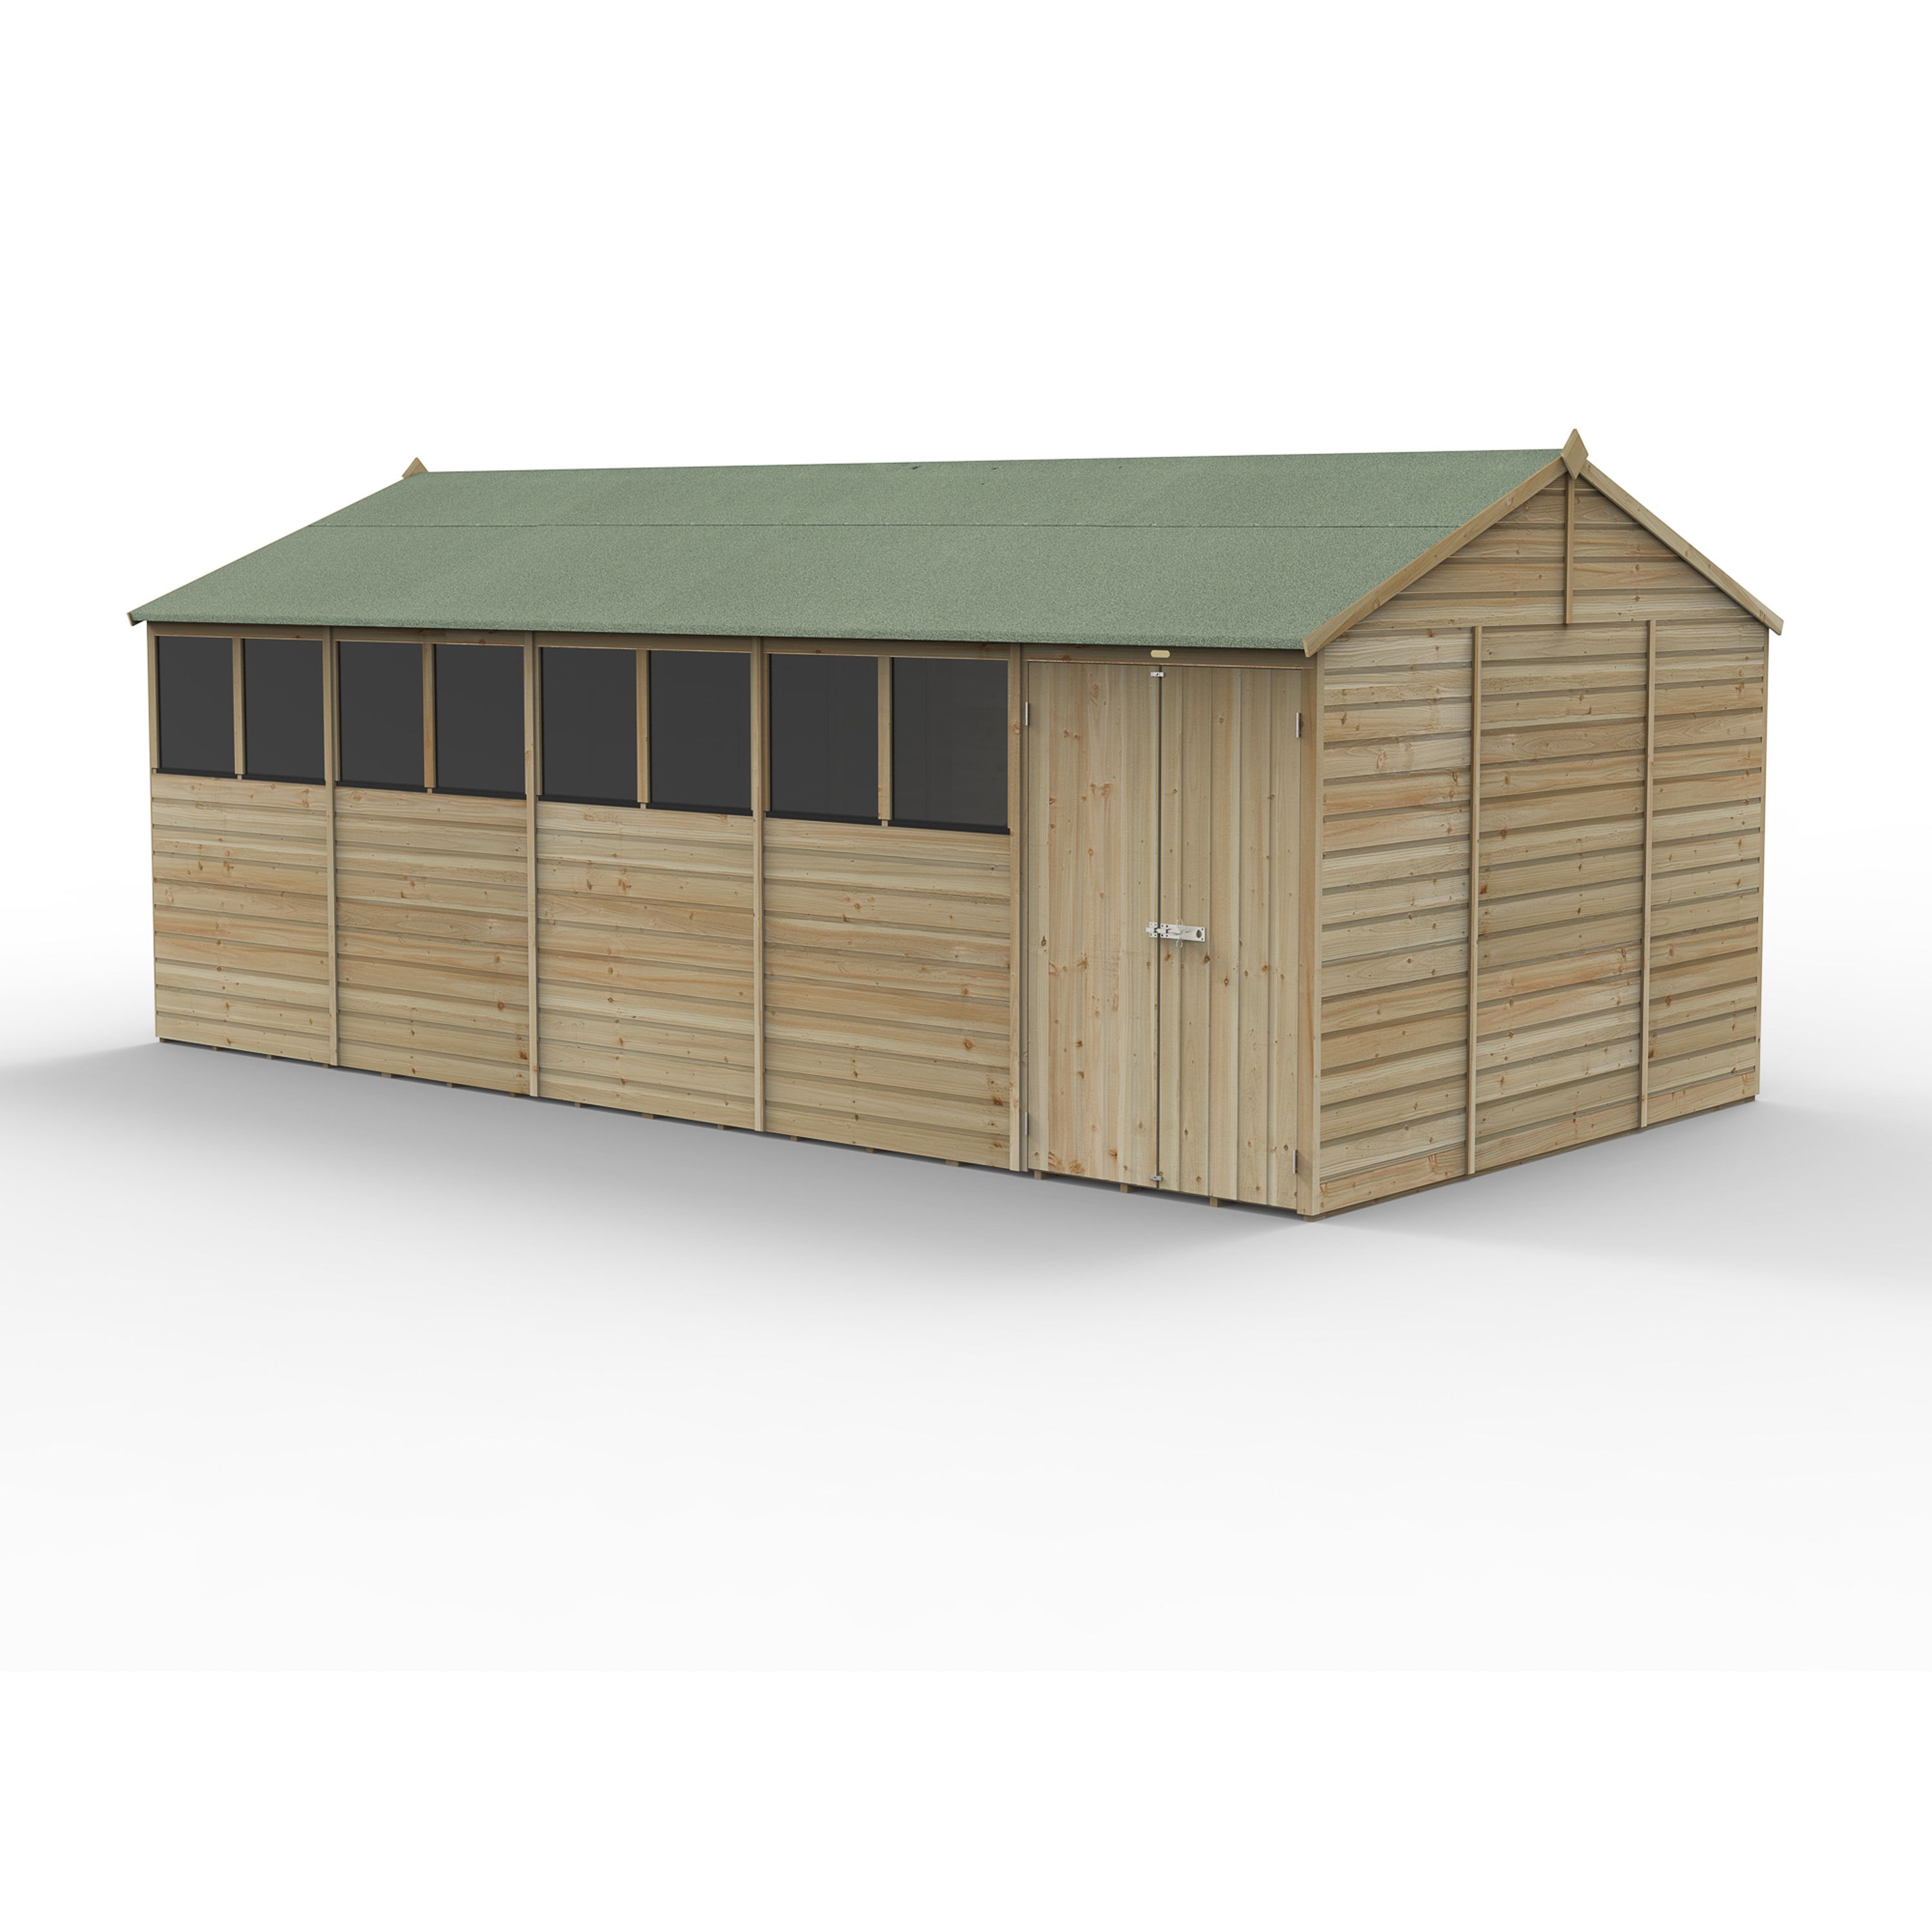 Forest Garden Beckwood 20x10 ft Reverse apex Natural timber Wooden 2 door Shed with floor & 8 windows - Assembly not required